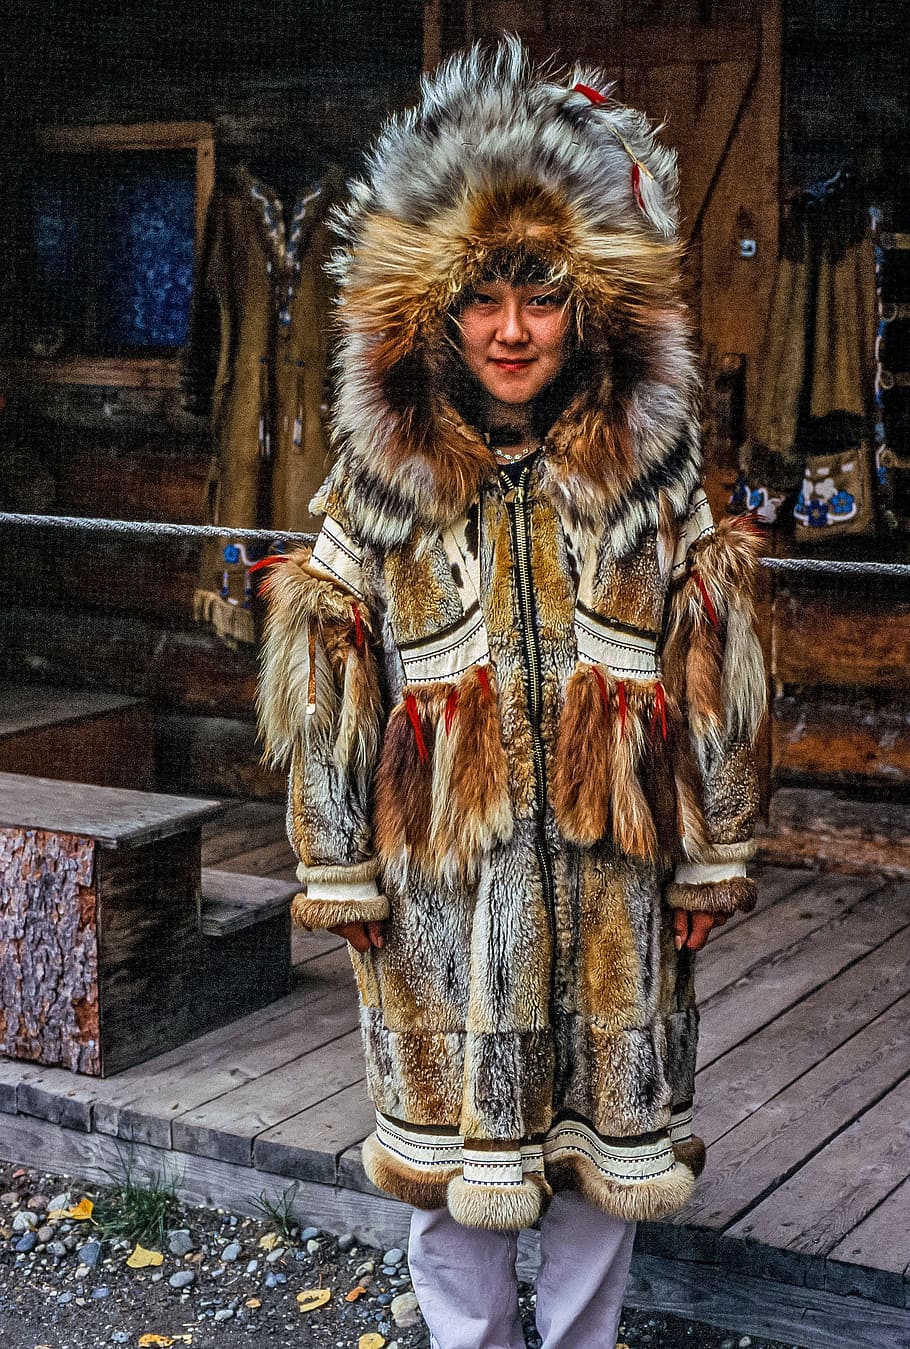 young, american woman, traditional, fur clothing, native, tribe, 25-30 years, american, clothing, decoration